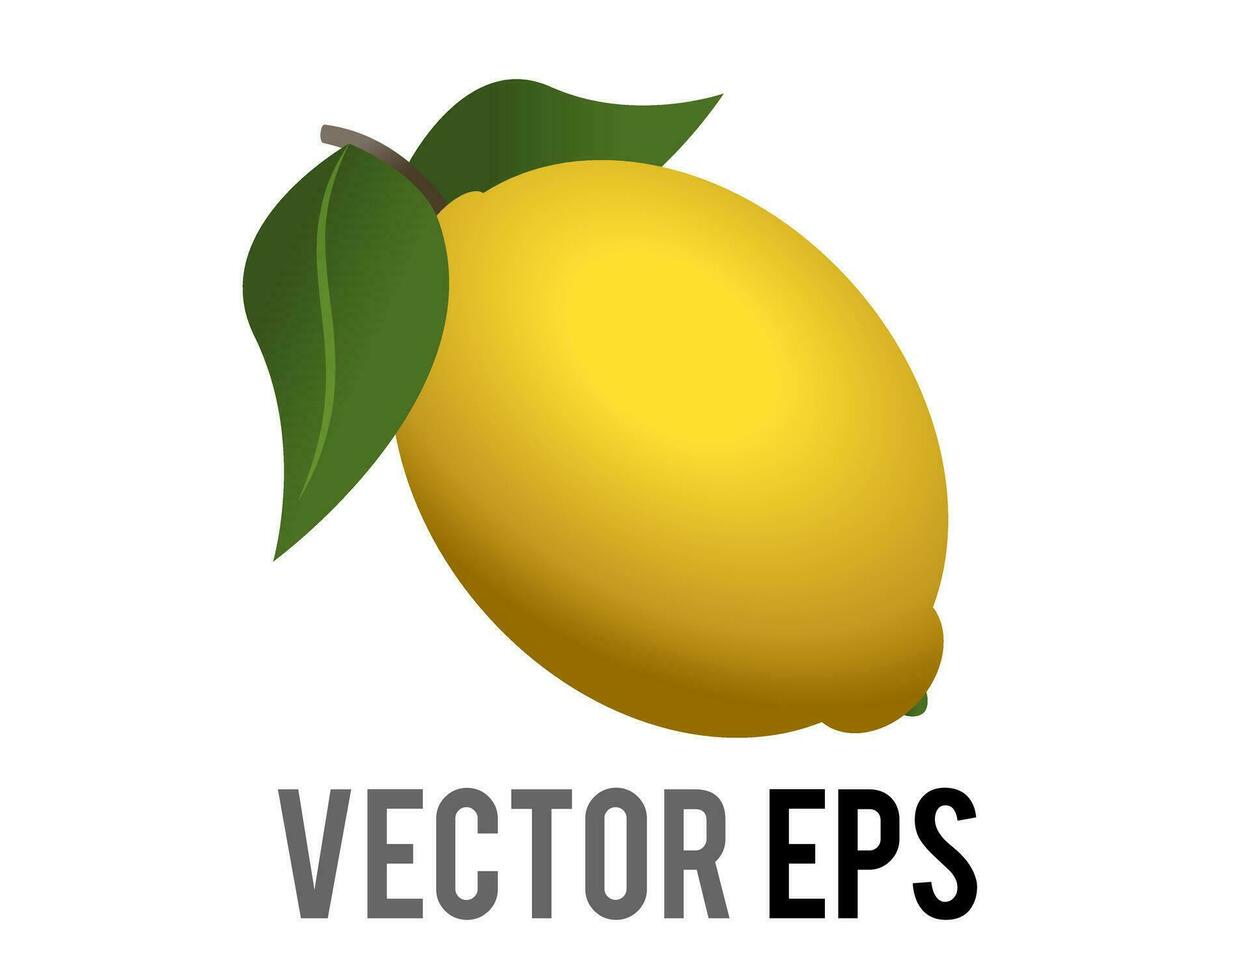 Sour, yellow colored citrus fruit of lemon icon with stem and green leaves vector